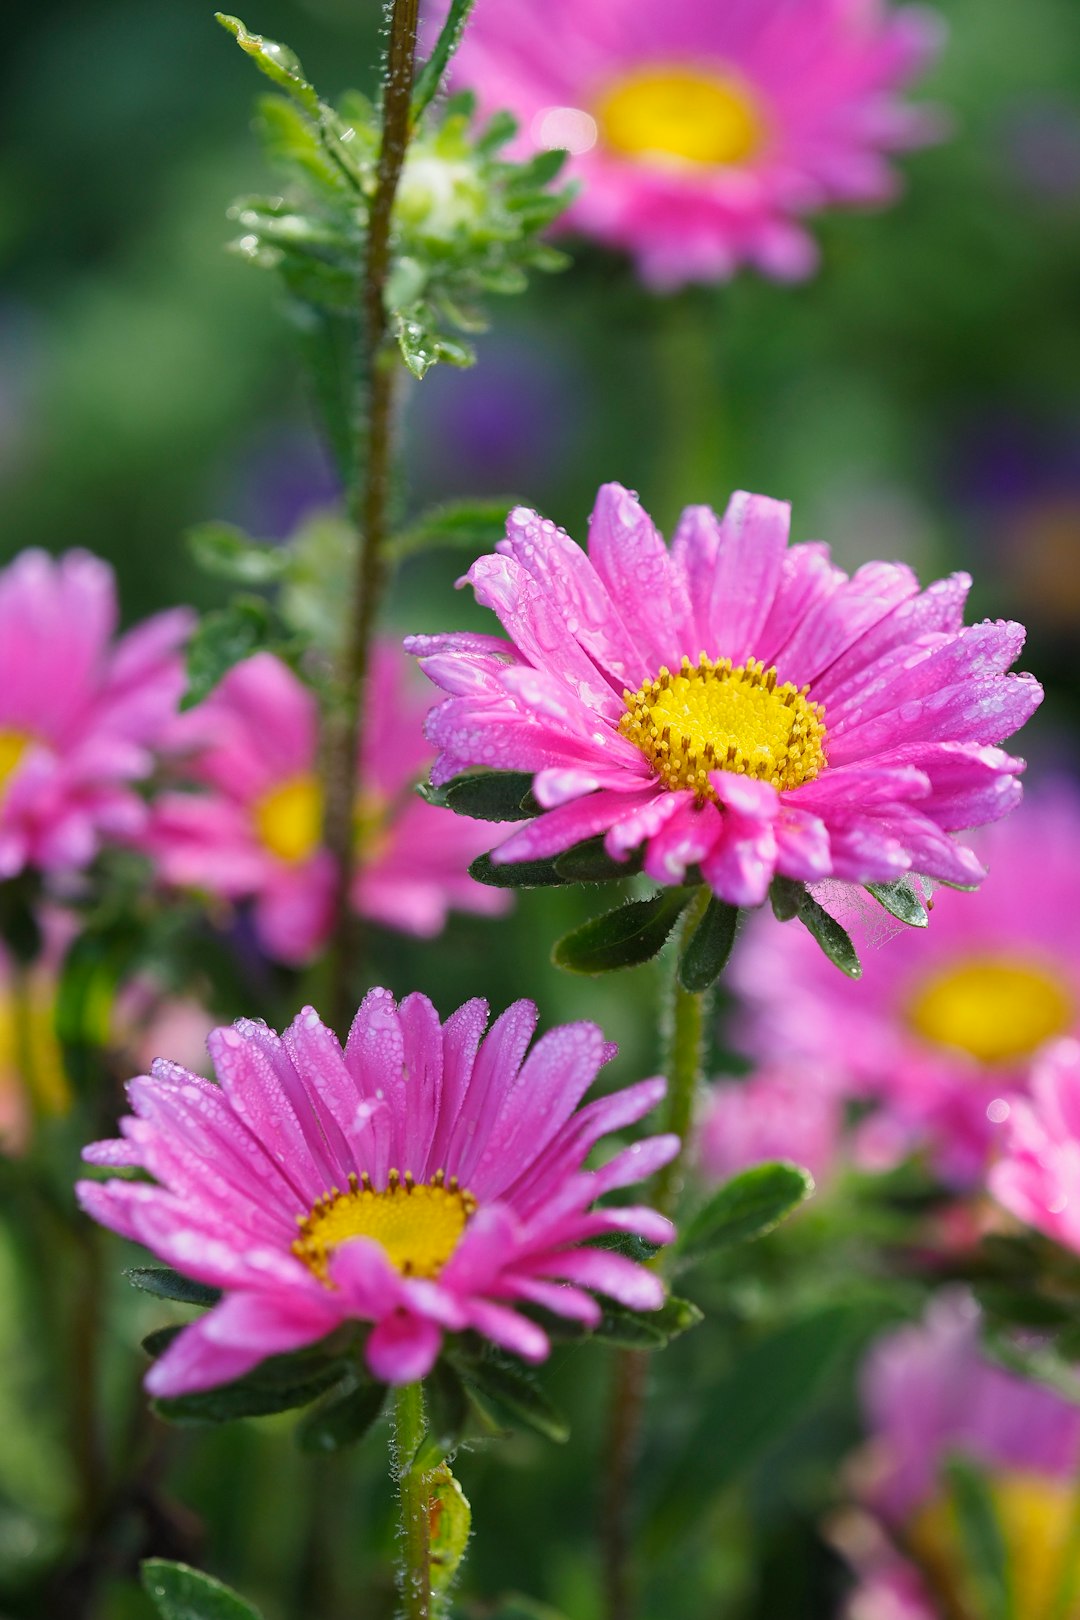 bokeh photography of two purple daisies